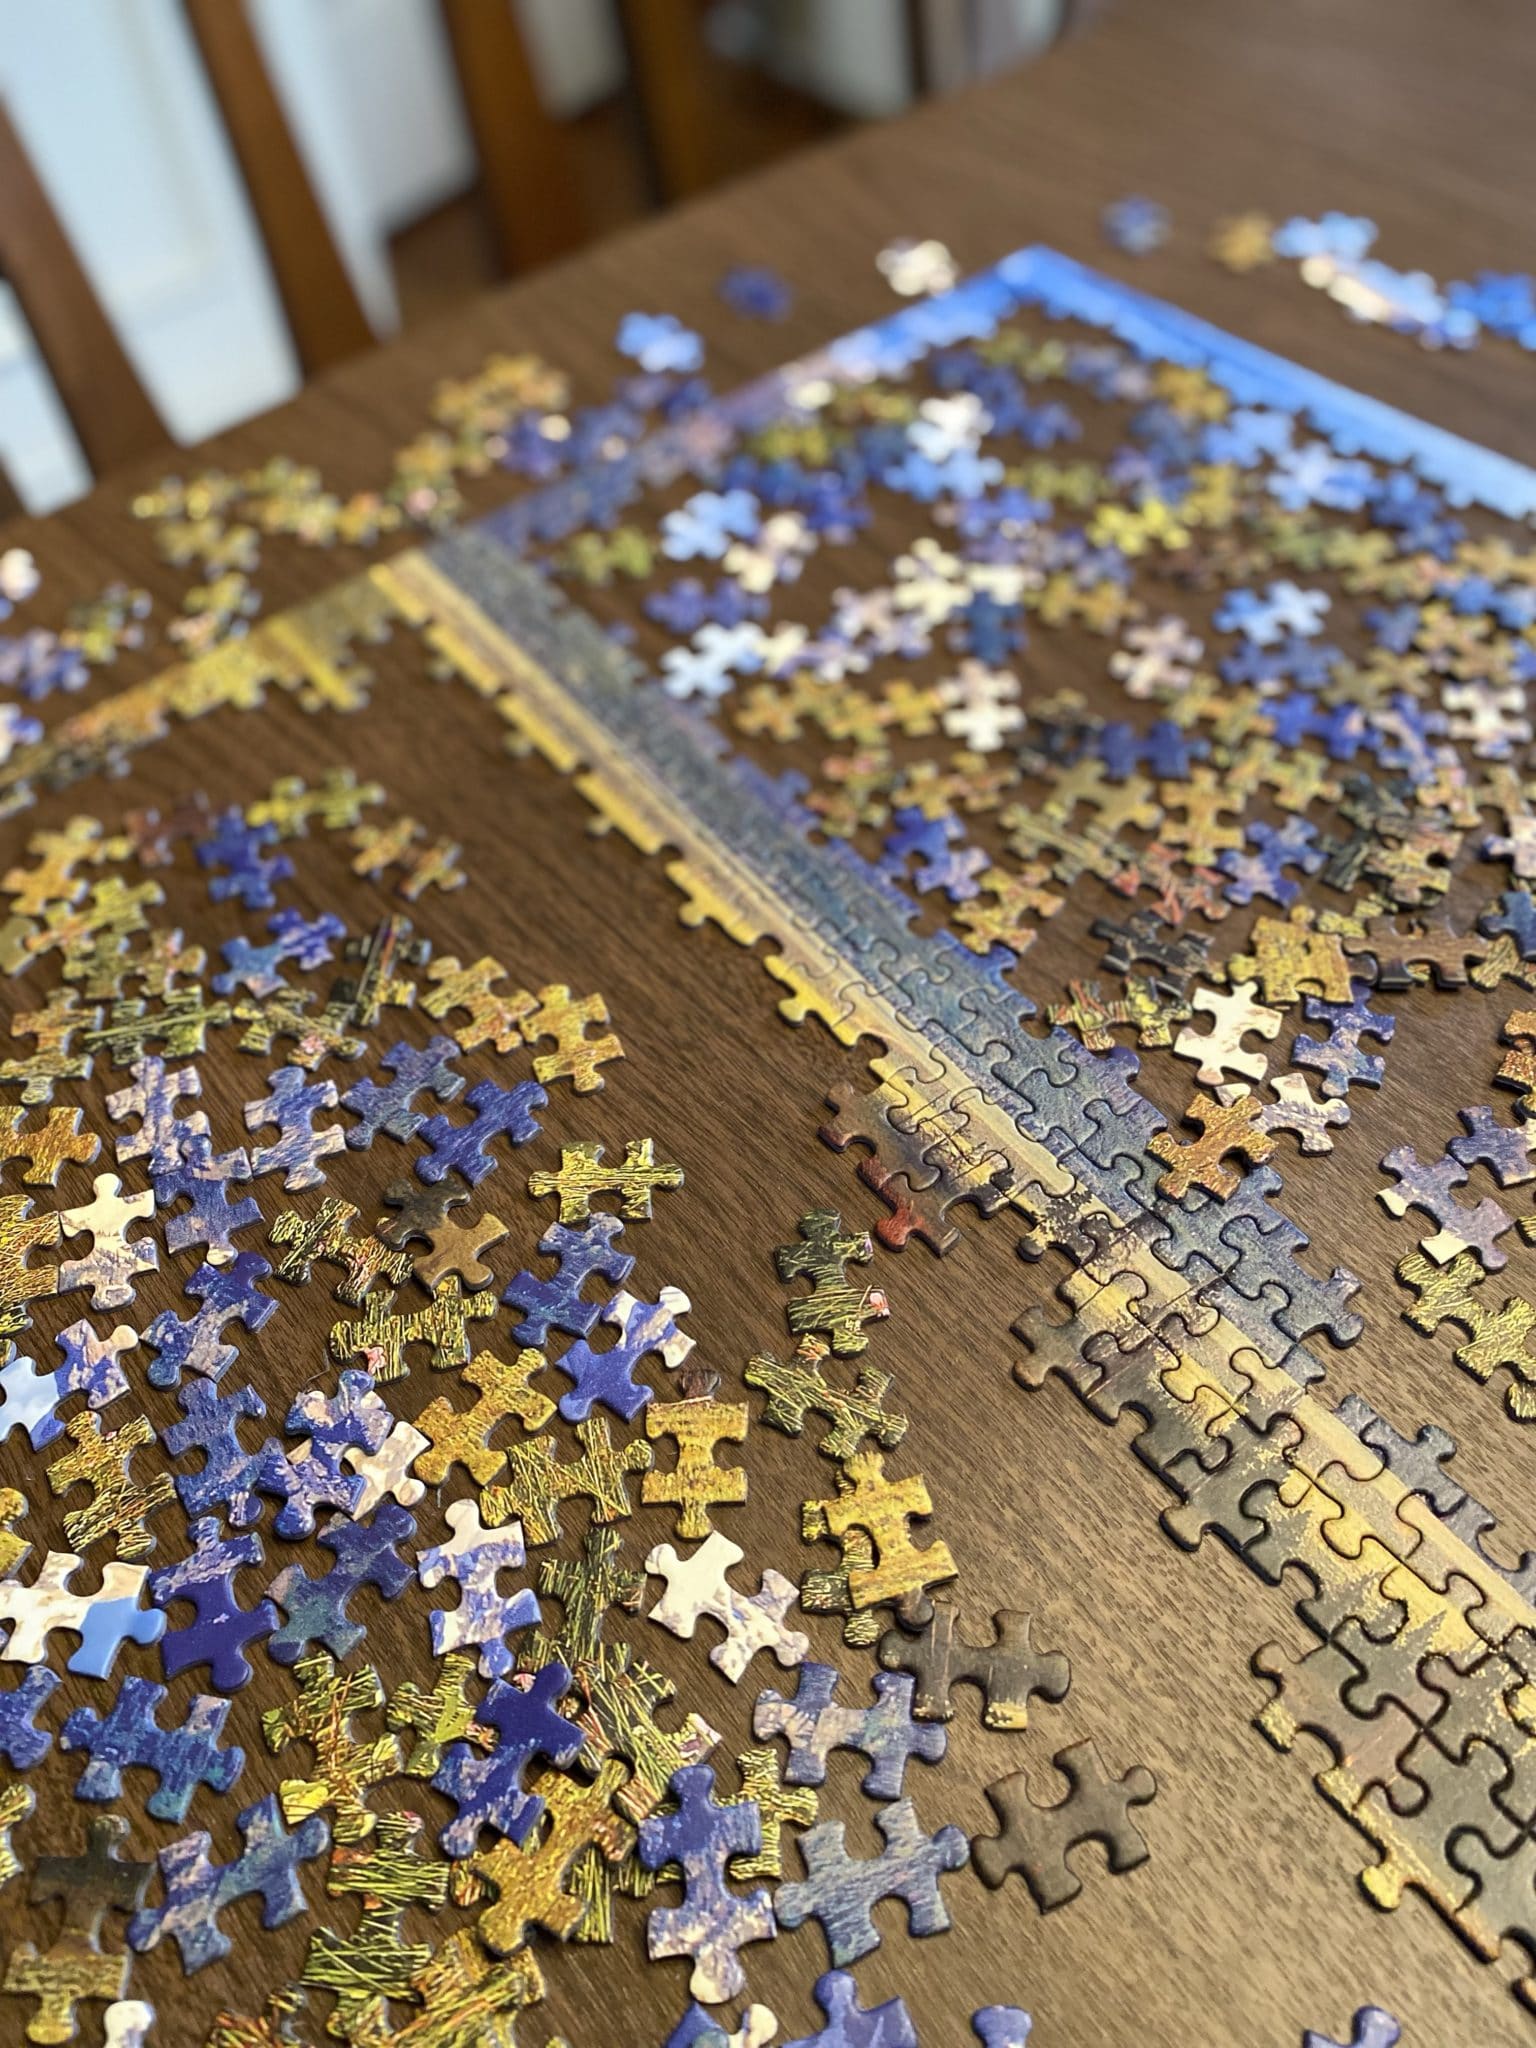 A jigsaw puzzle in progress on a dining room table